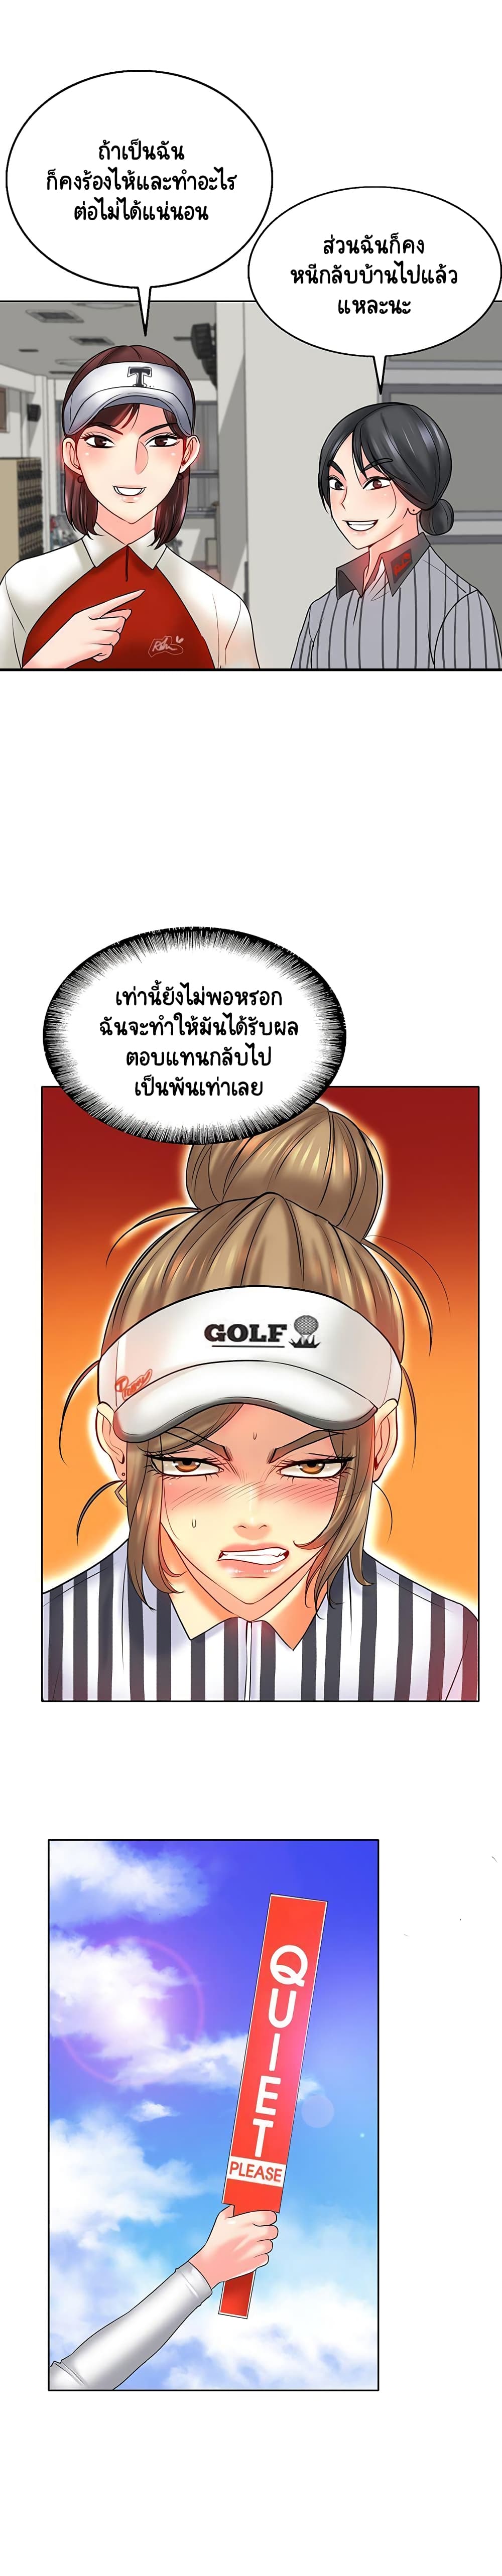 Hole In One23 (13)